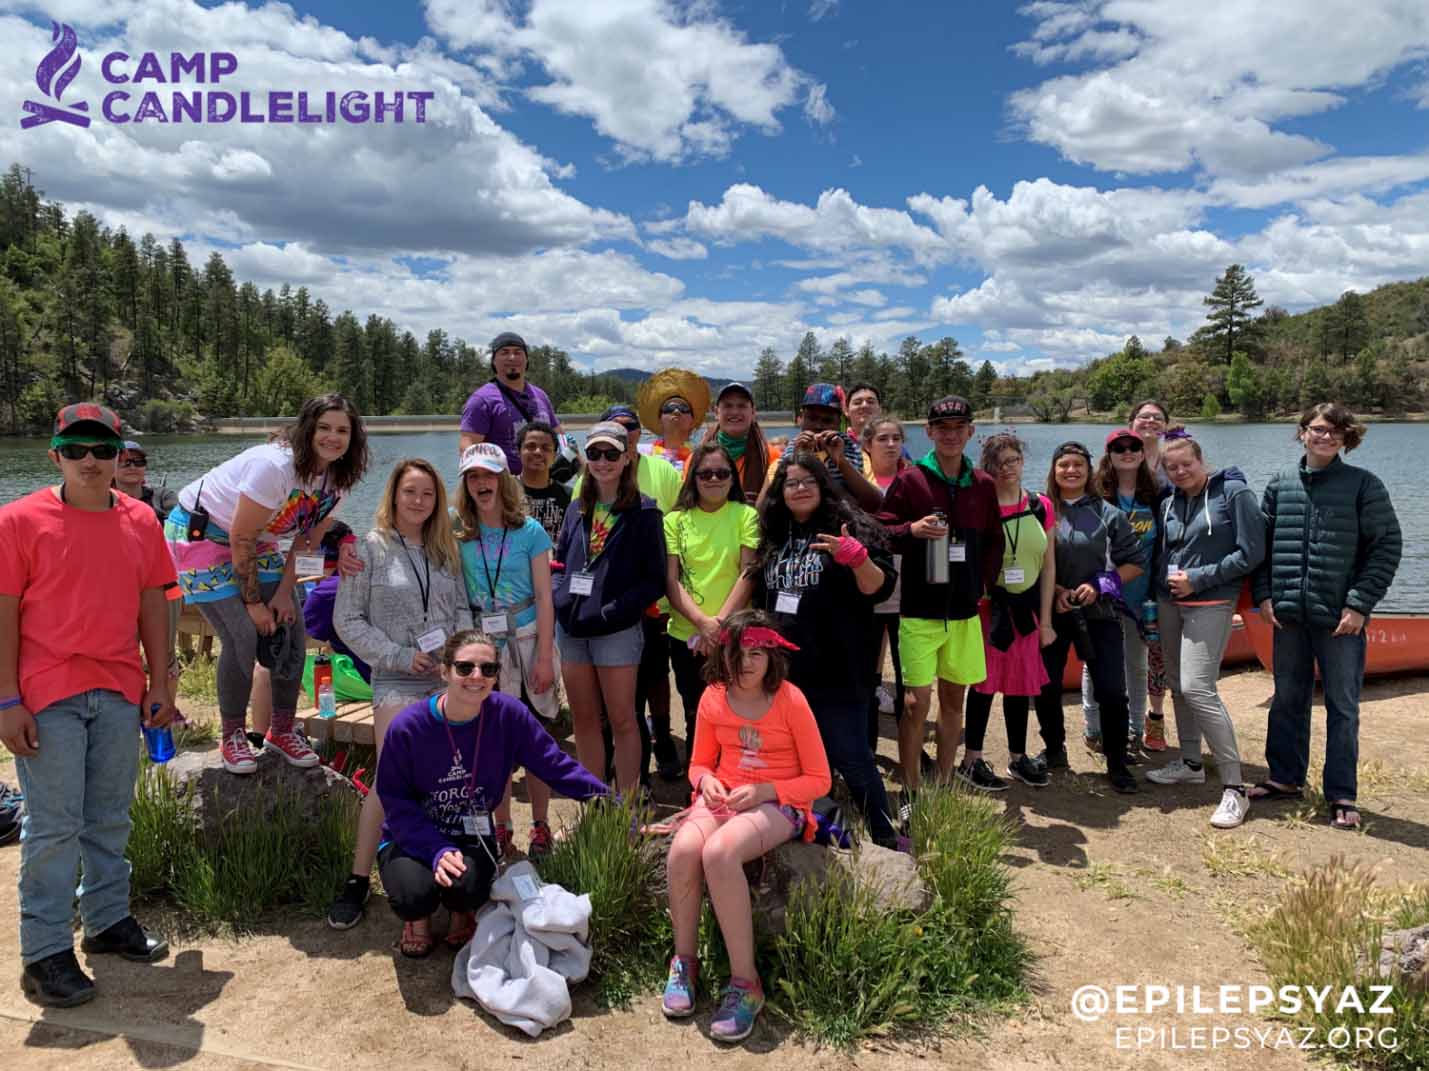 Spotlight on Camp Candlelight, Seizure First Aid, Awareness, and